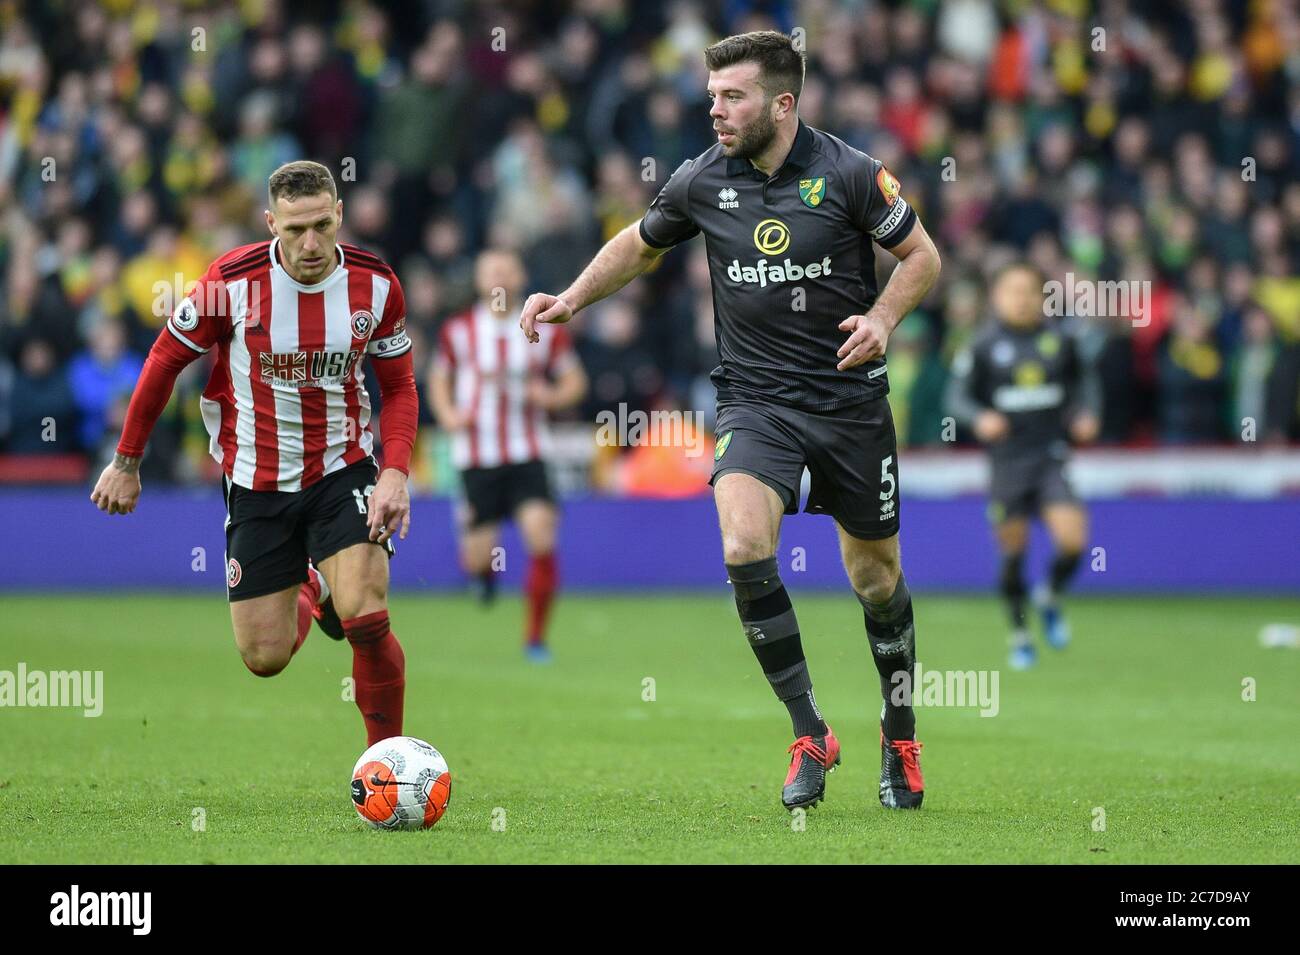 7th March 2020, Bramall Lane, Sheffield, England; Premier League, Sheffield United v Norwich City : Grant Hanley (5) of Norwich City with the ball Stock Photo